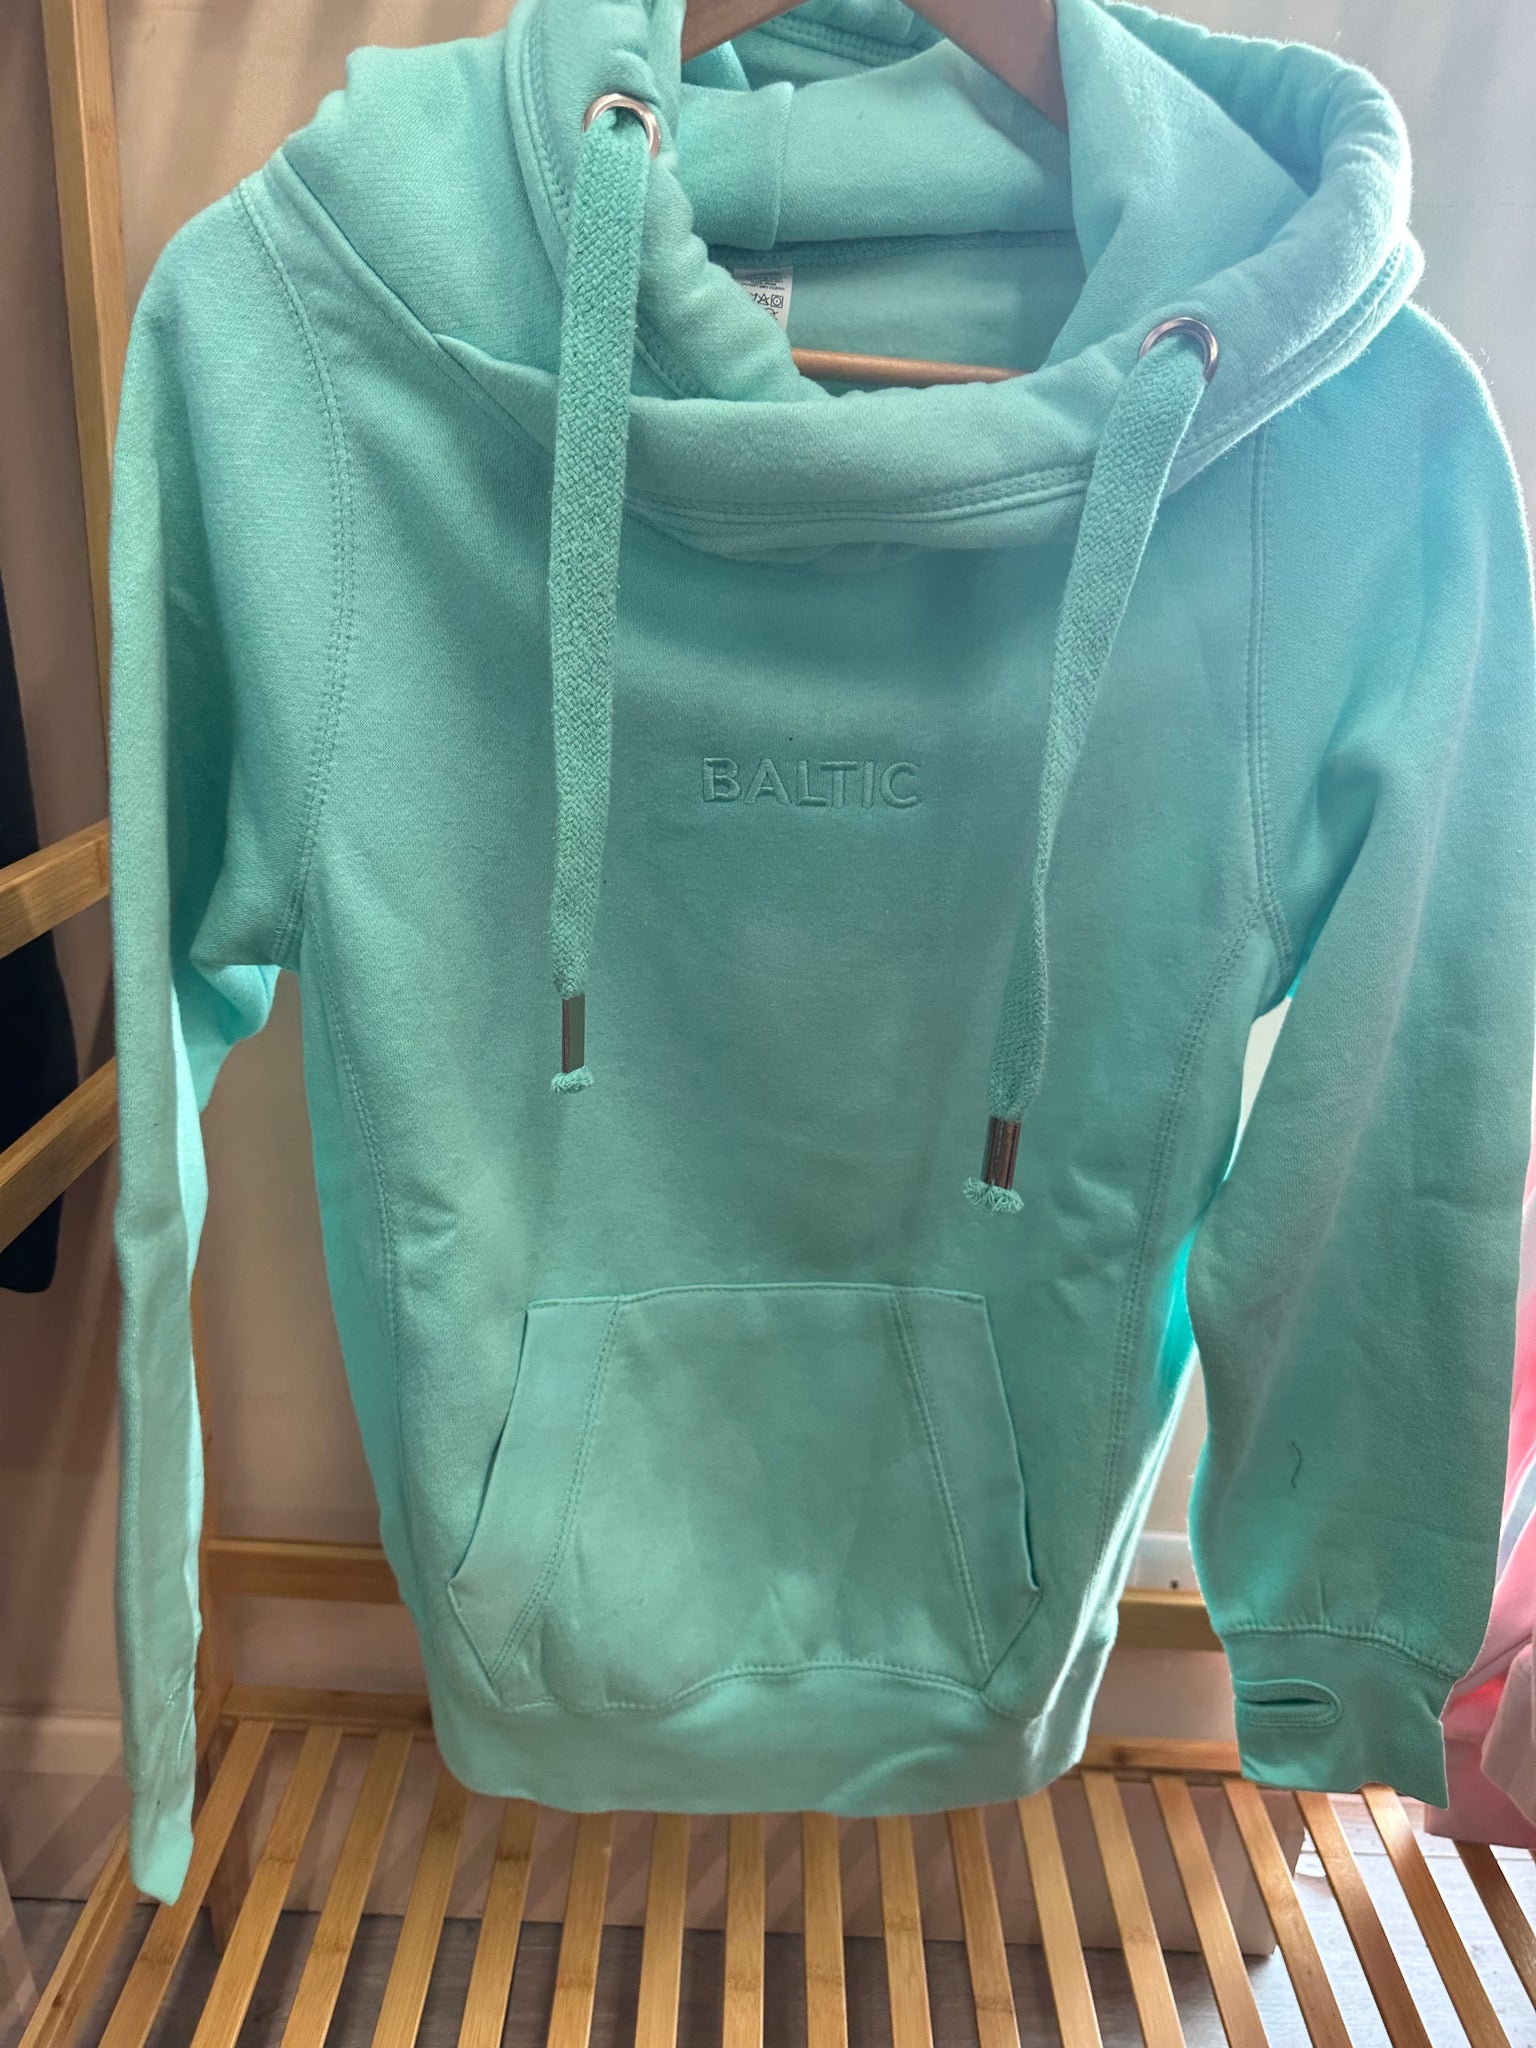 SAMPLE SALE  Peppermint Baltic Crossneck Hoodie SIZES XS